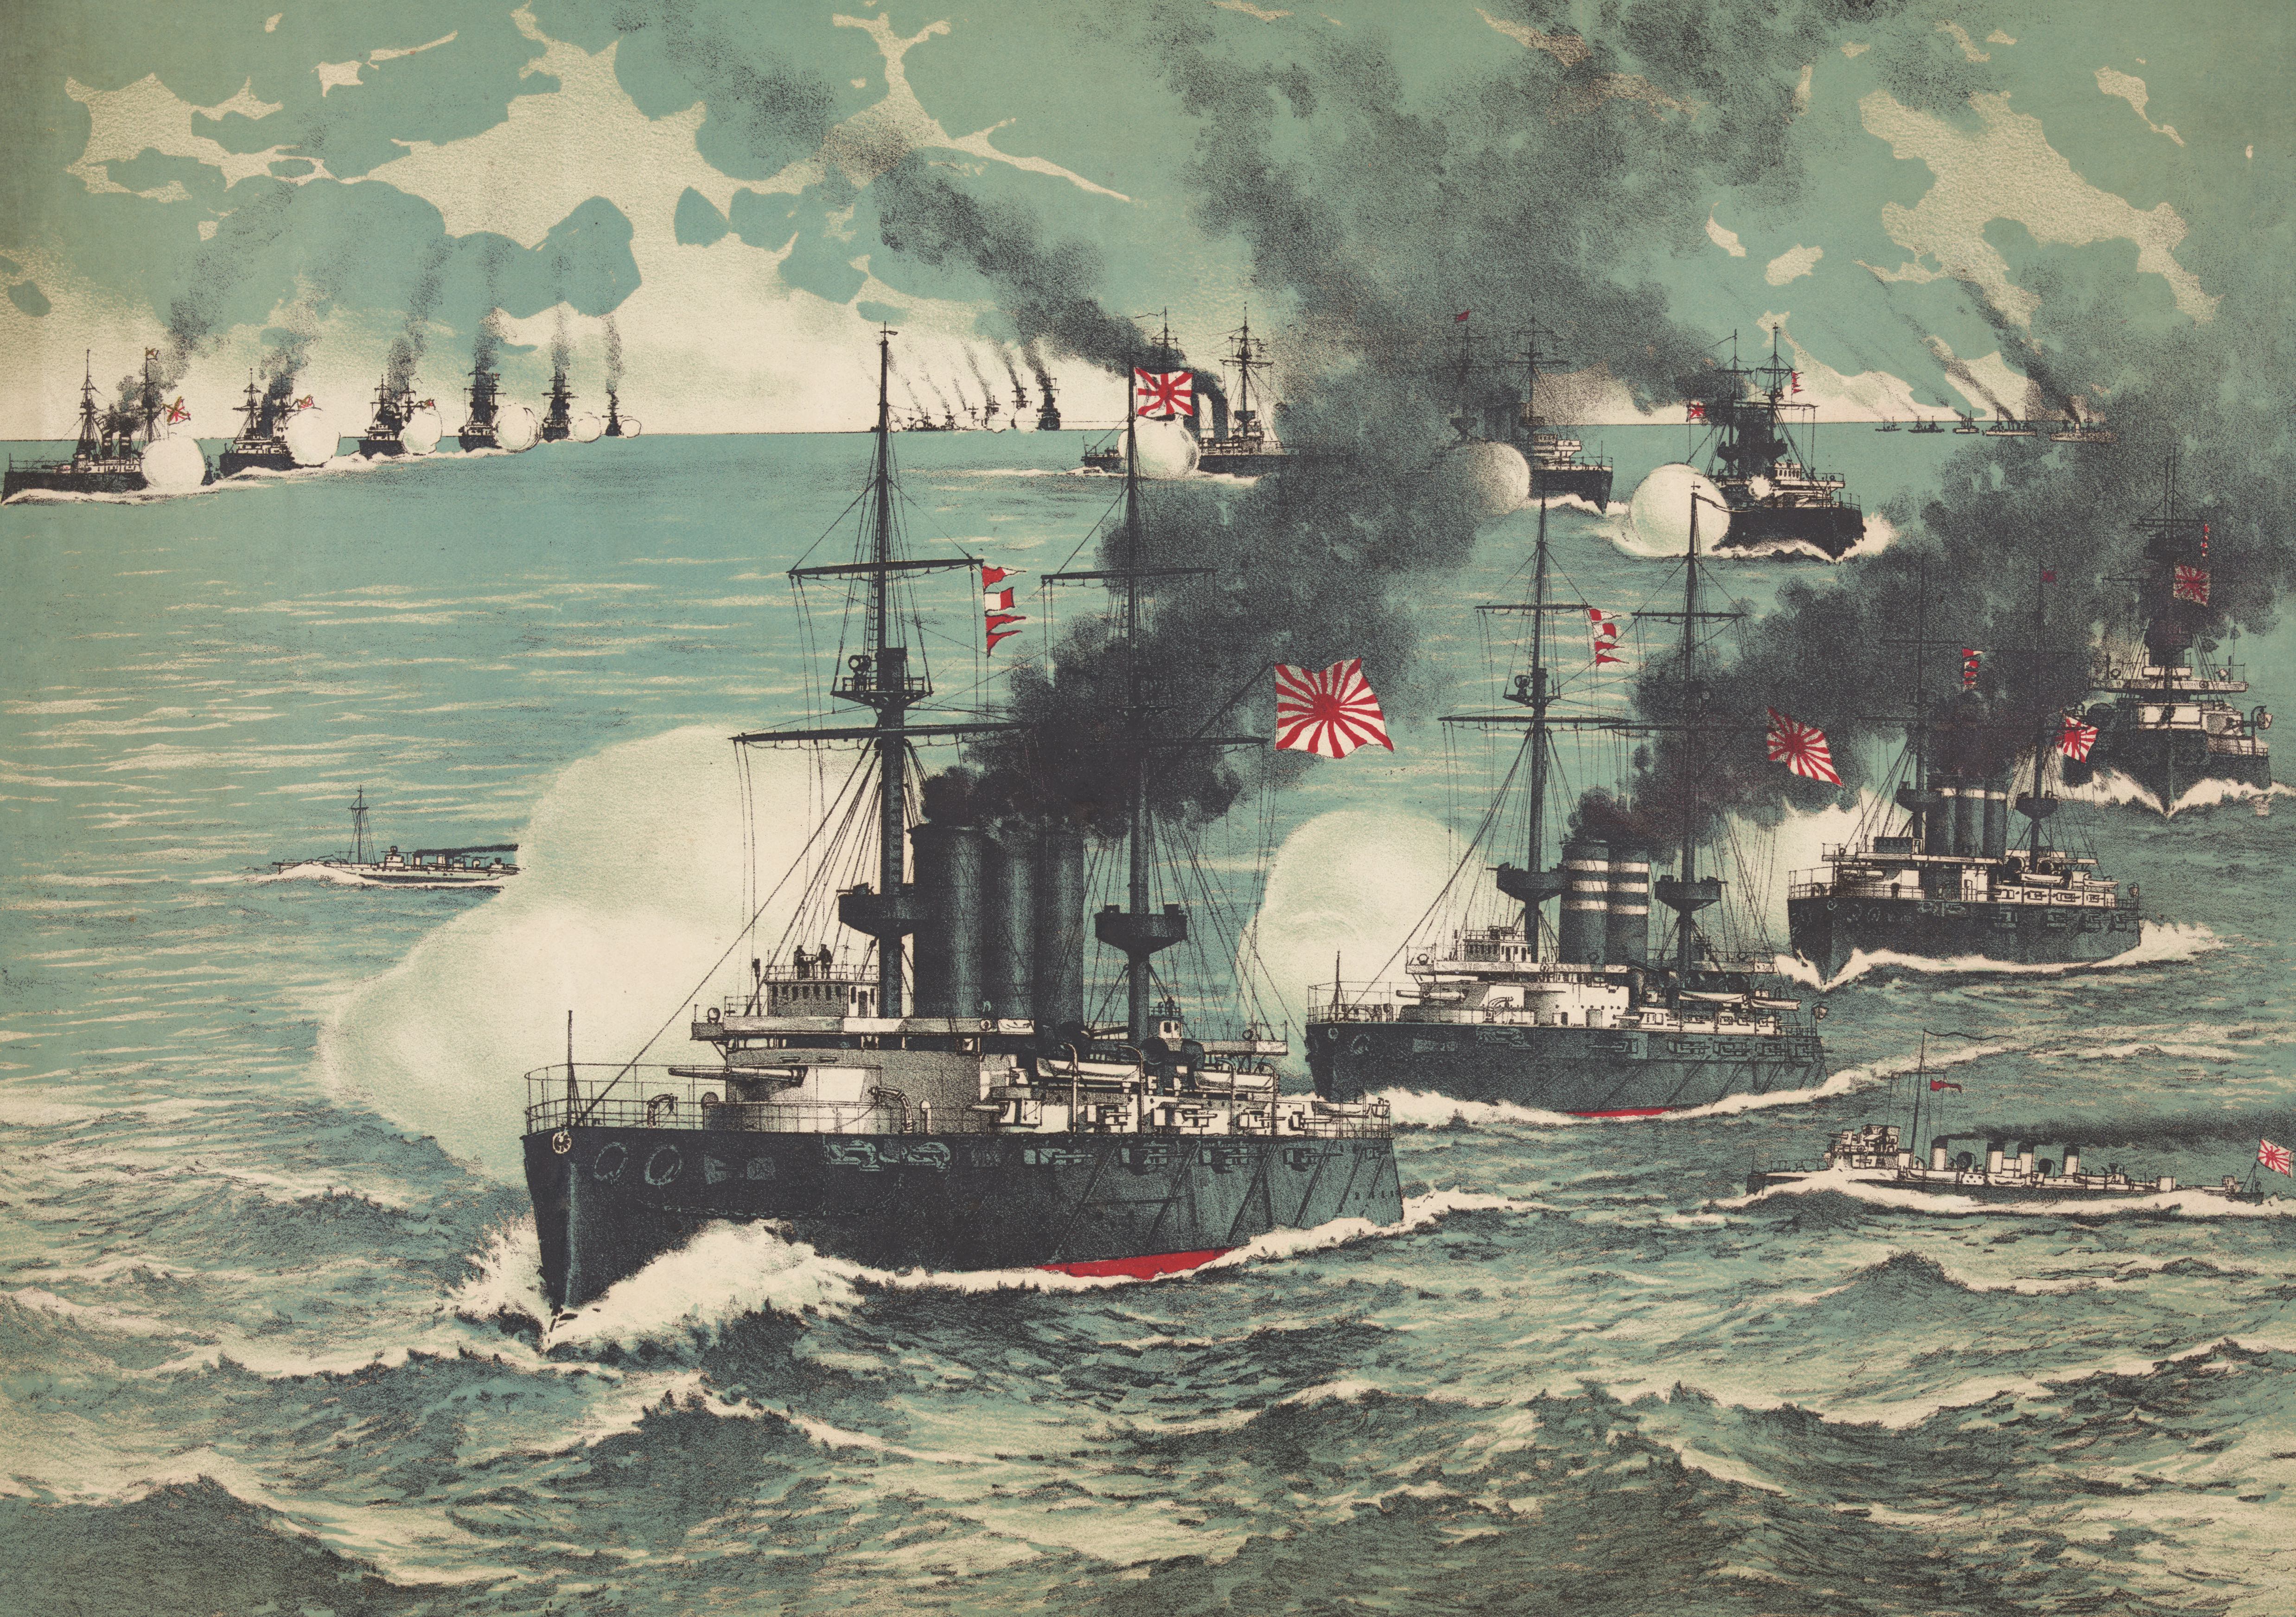 Having “crossed the T,” the ships of Adm. Heihachiro Togo’s Japanese fleet fire on those of the Russian Second Pacific Squadron at Tsushima Strait in this contemporary depiction. / Library of Congress